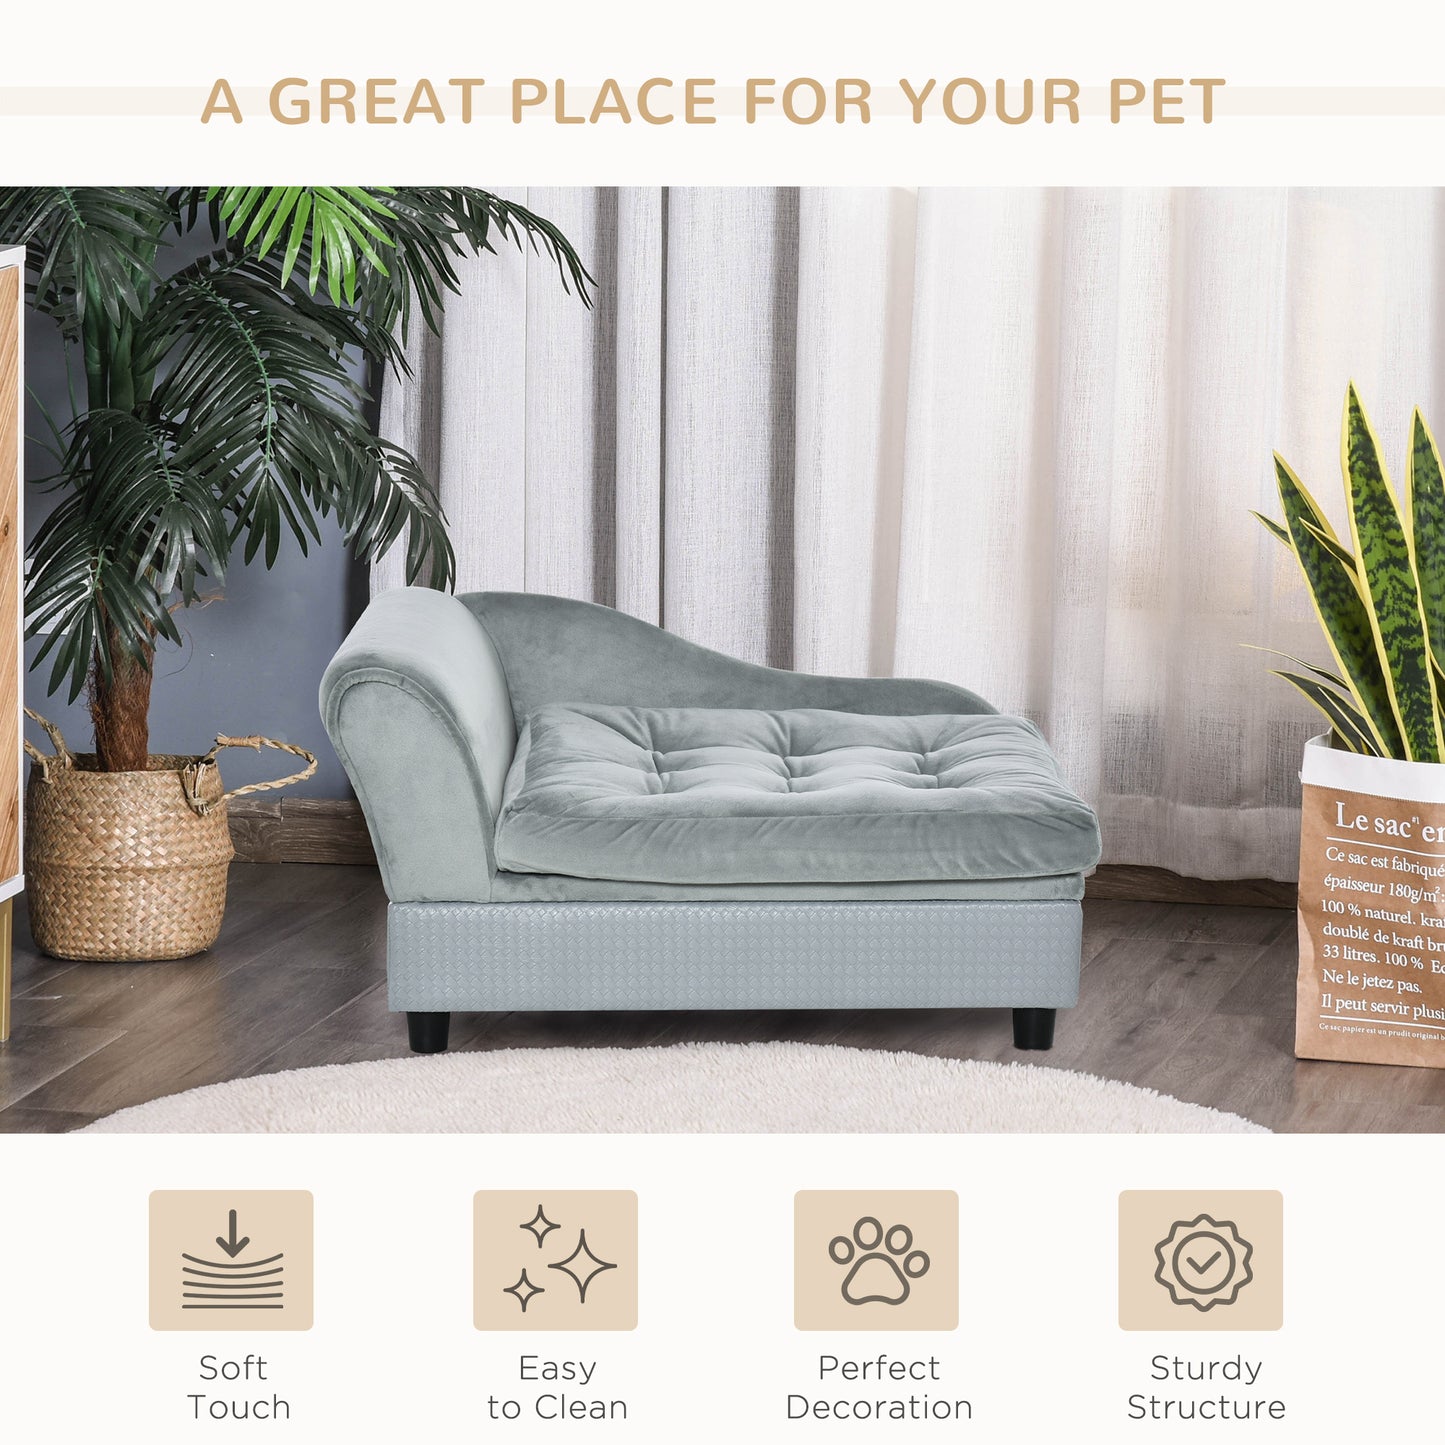 PawHut Luxury Fancy Dog Bed for Small Dogs with Hidden Storage